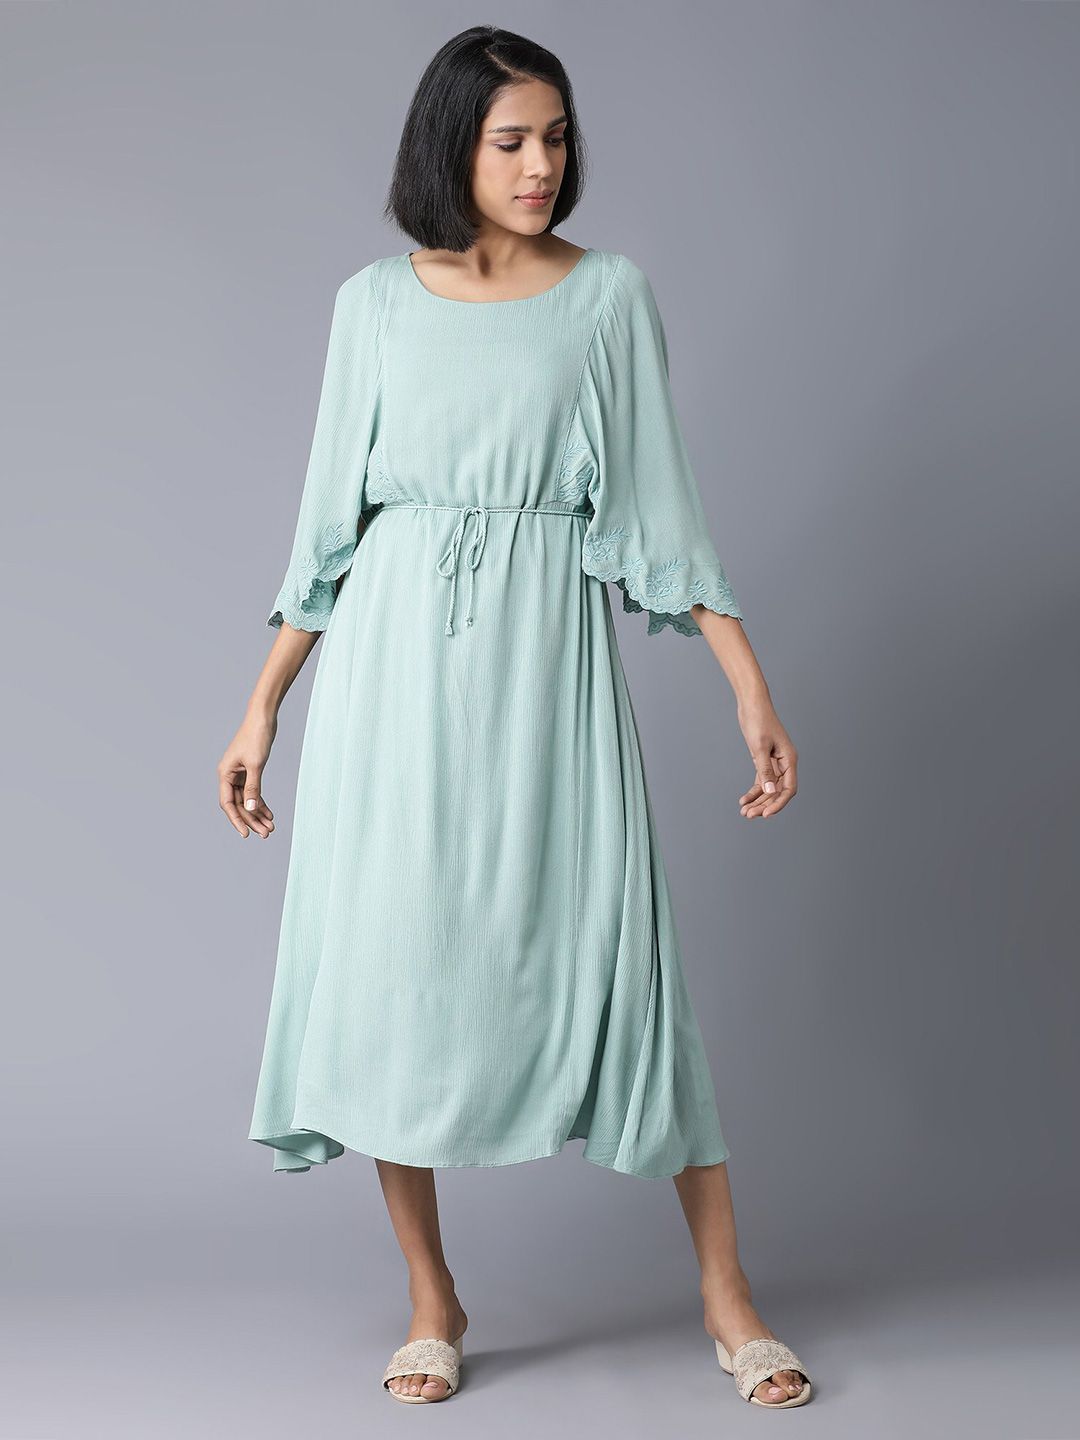 W Teal A-Line Midi Dress Price in India